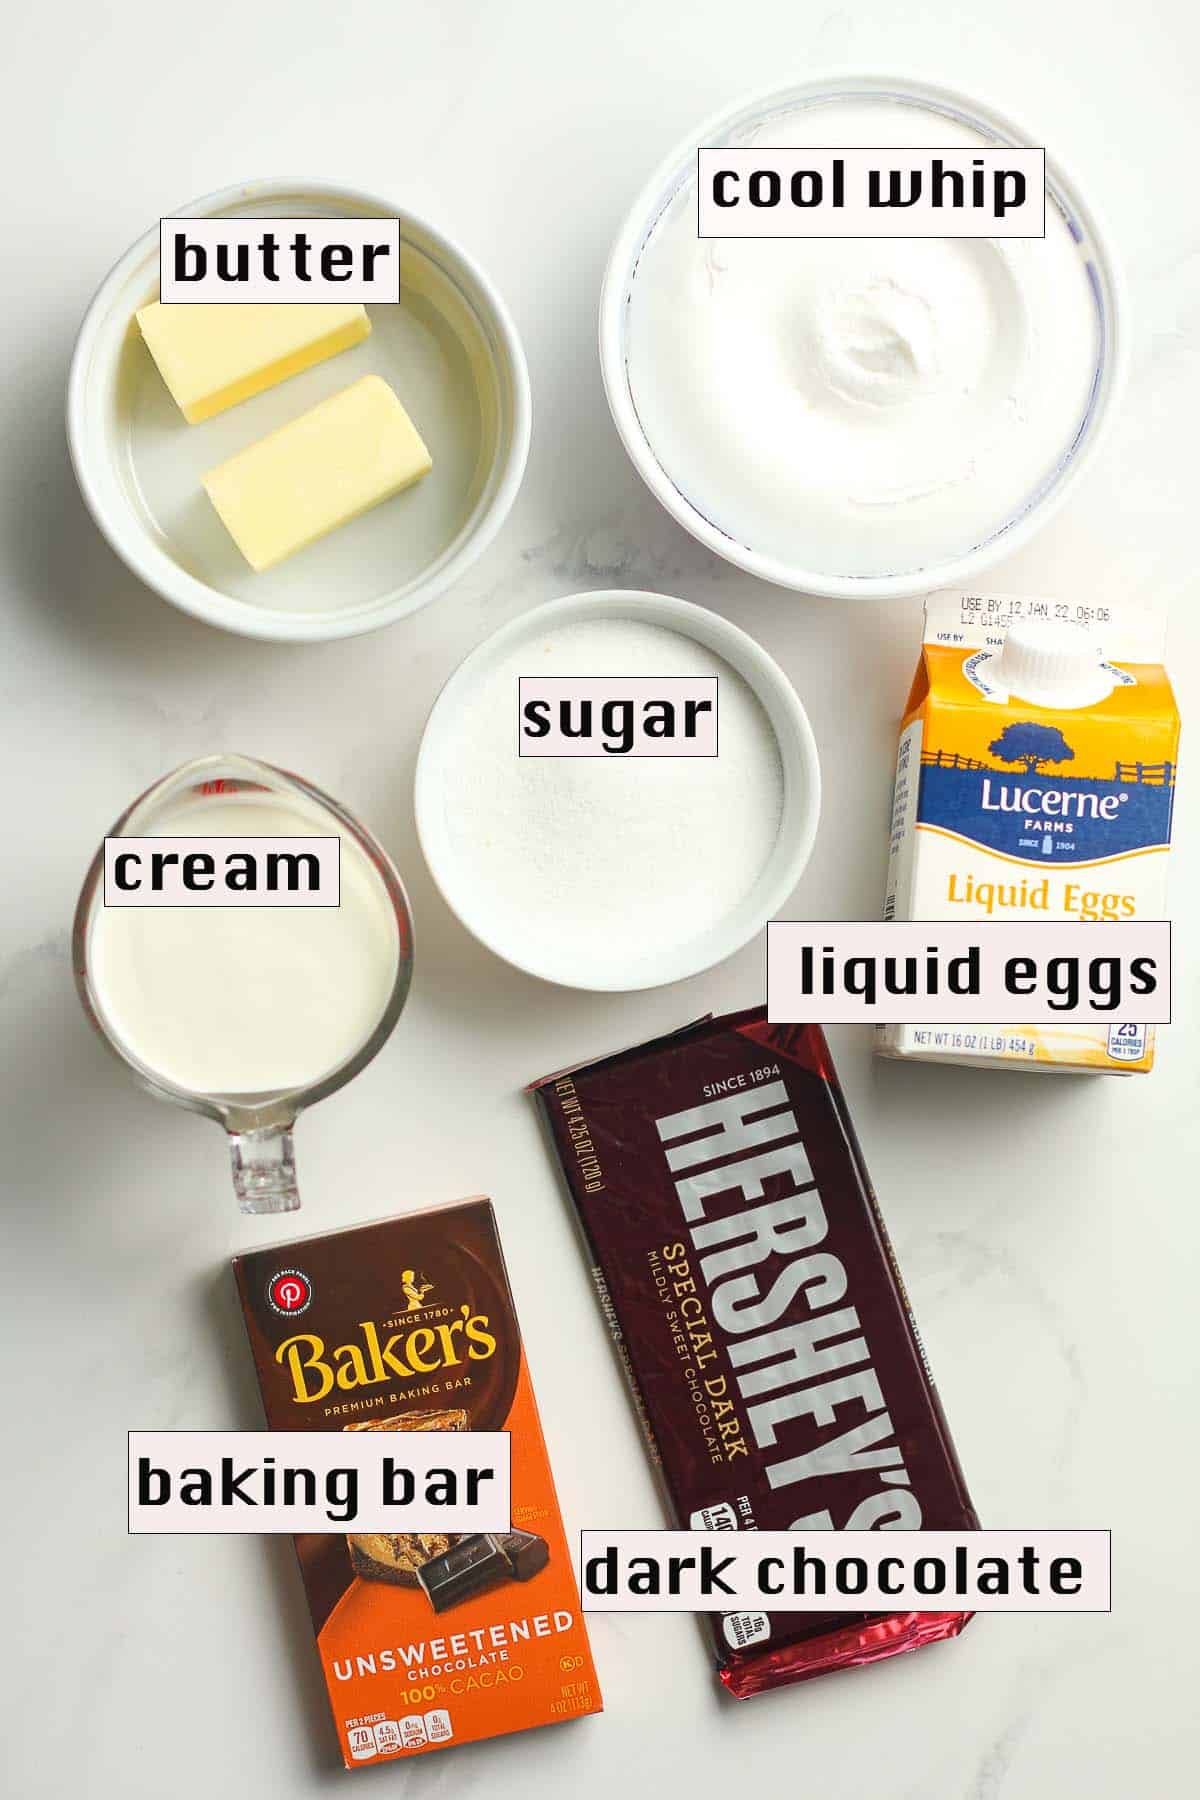 The ingredients for the chocolate layer.